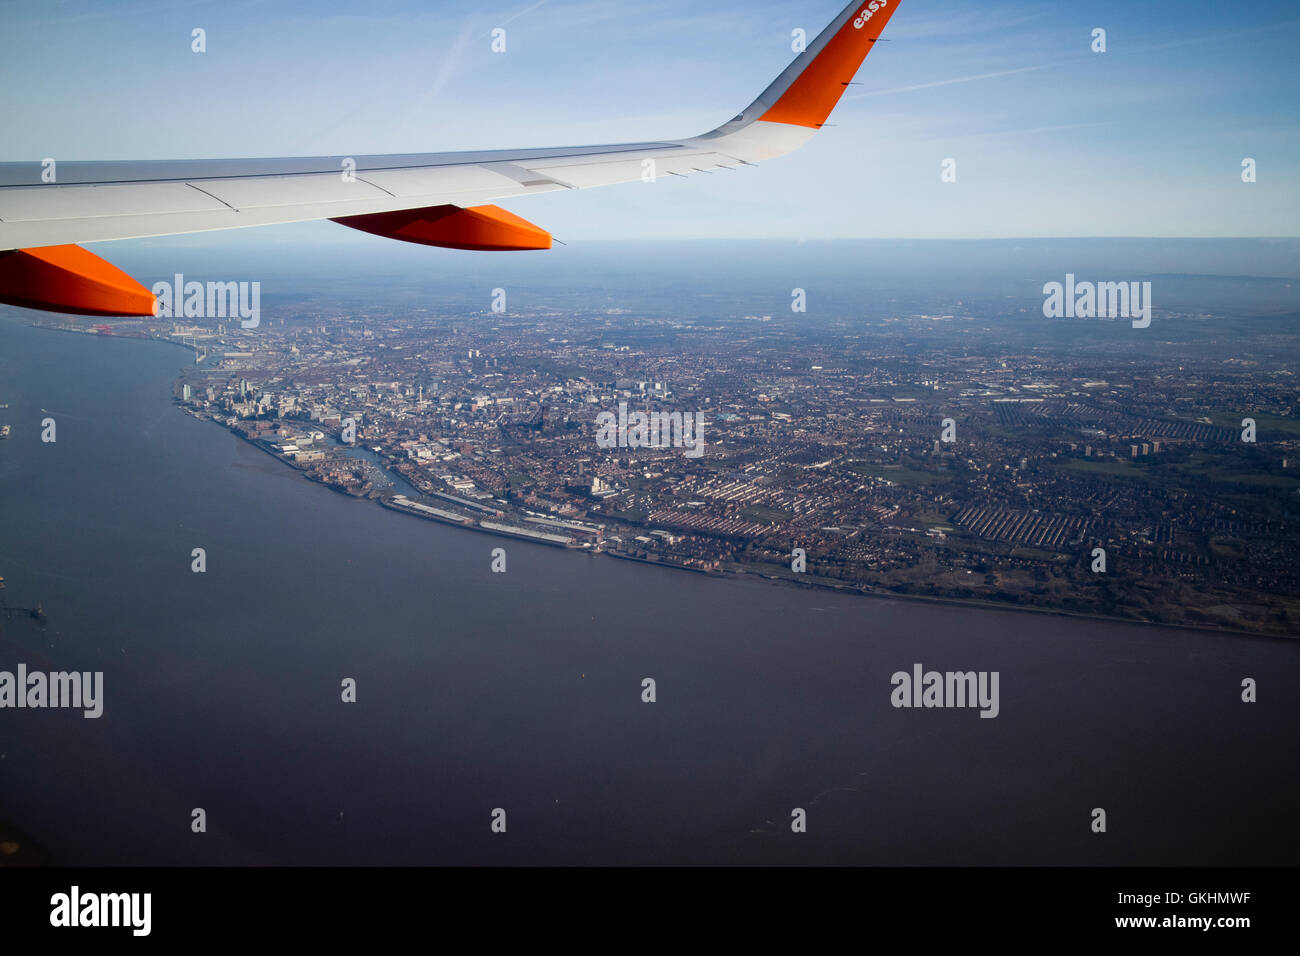 aerial view of easyjet aircraft flying over Liverpool and the river Mersey Stock Photo